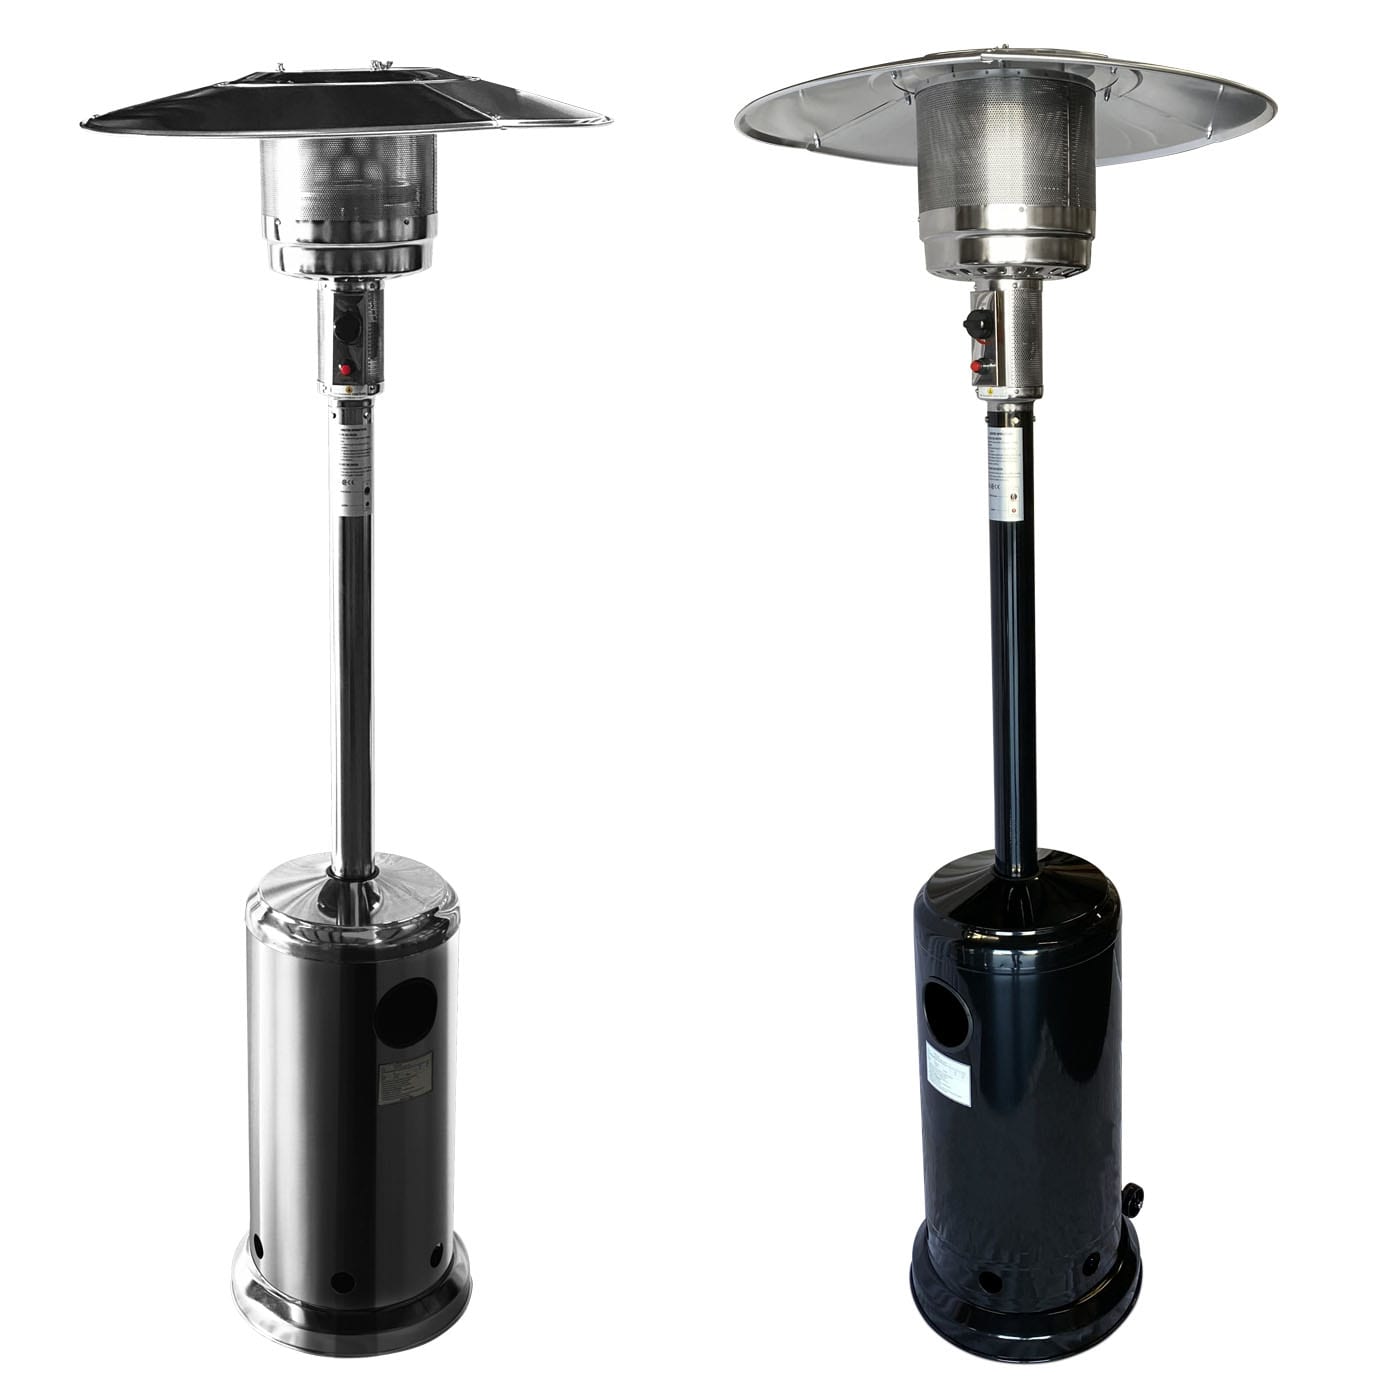 patio outdoor heater black and stainless steel versions